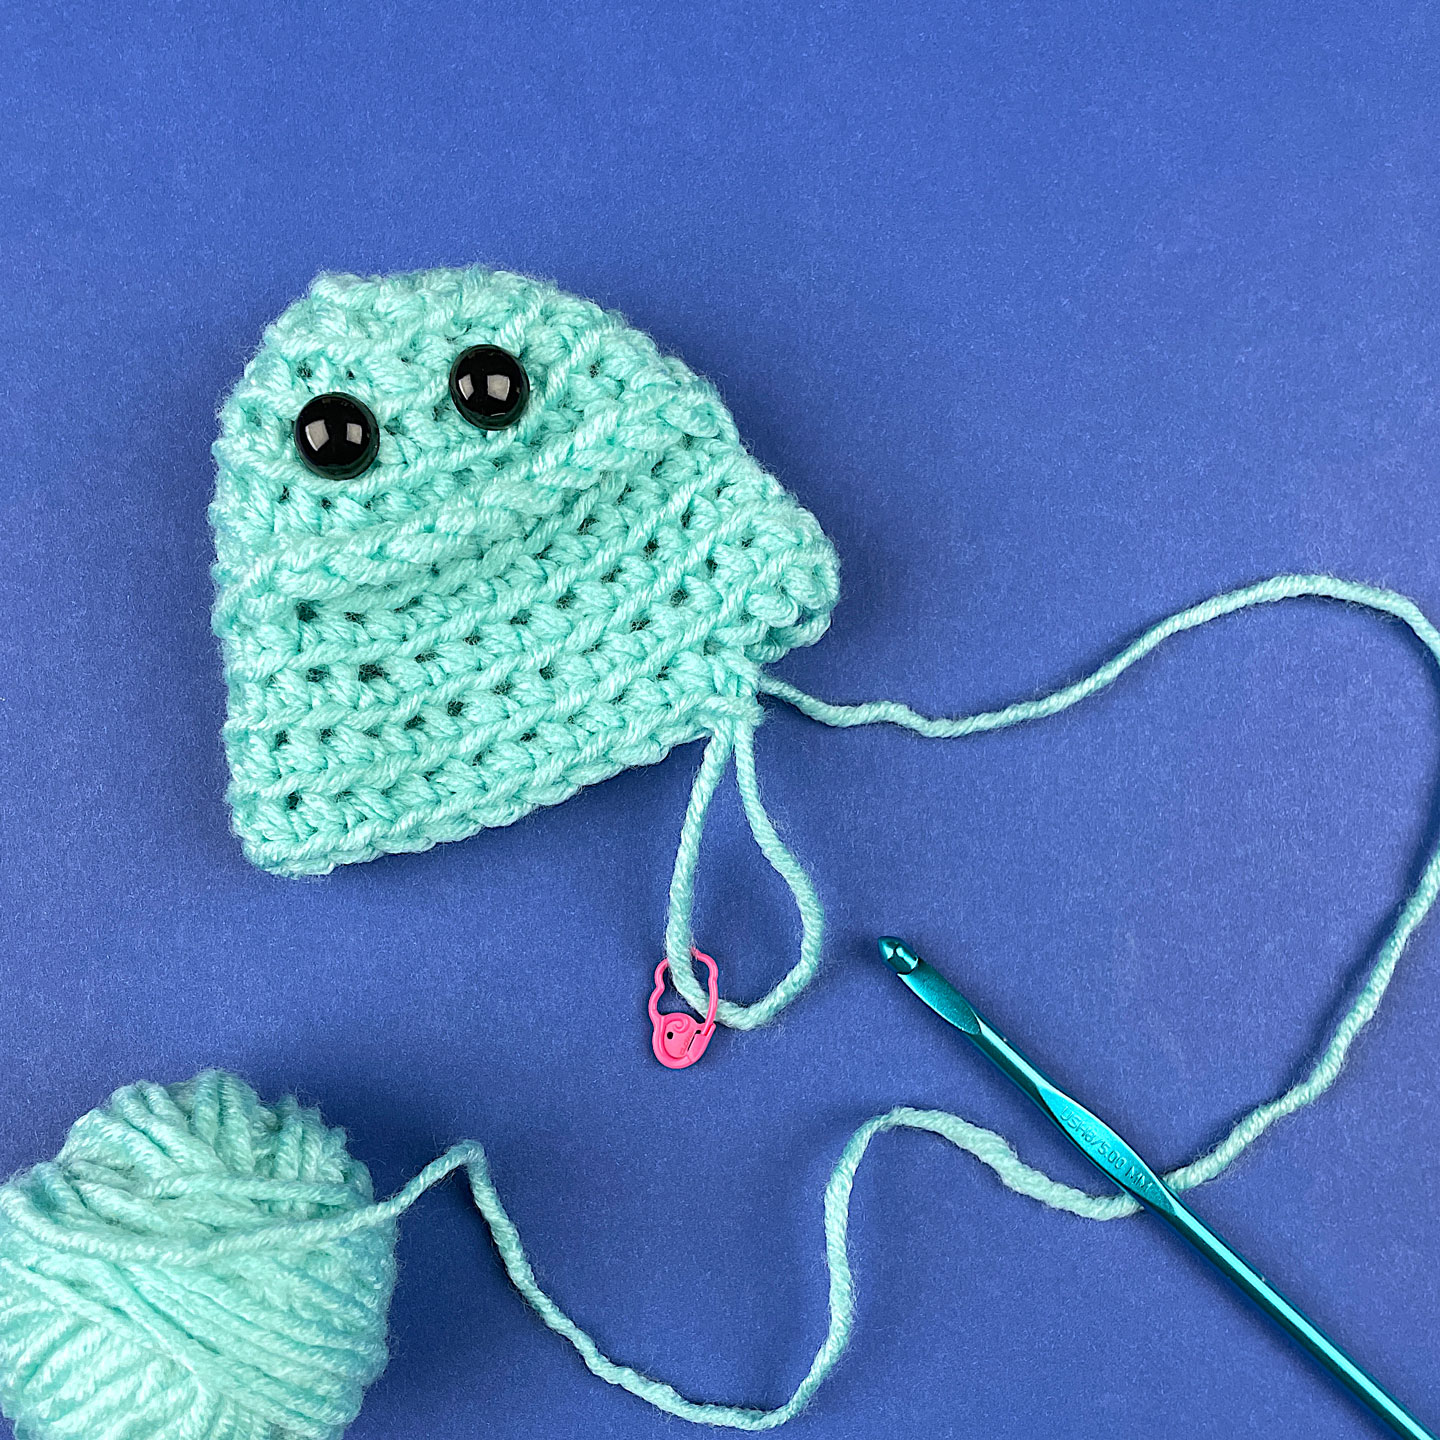 Add a sweater to (almost) any crocheted animal! - Shiny Happy World